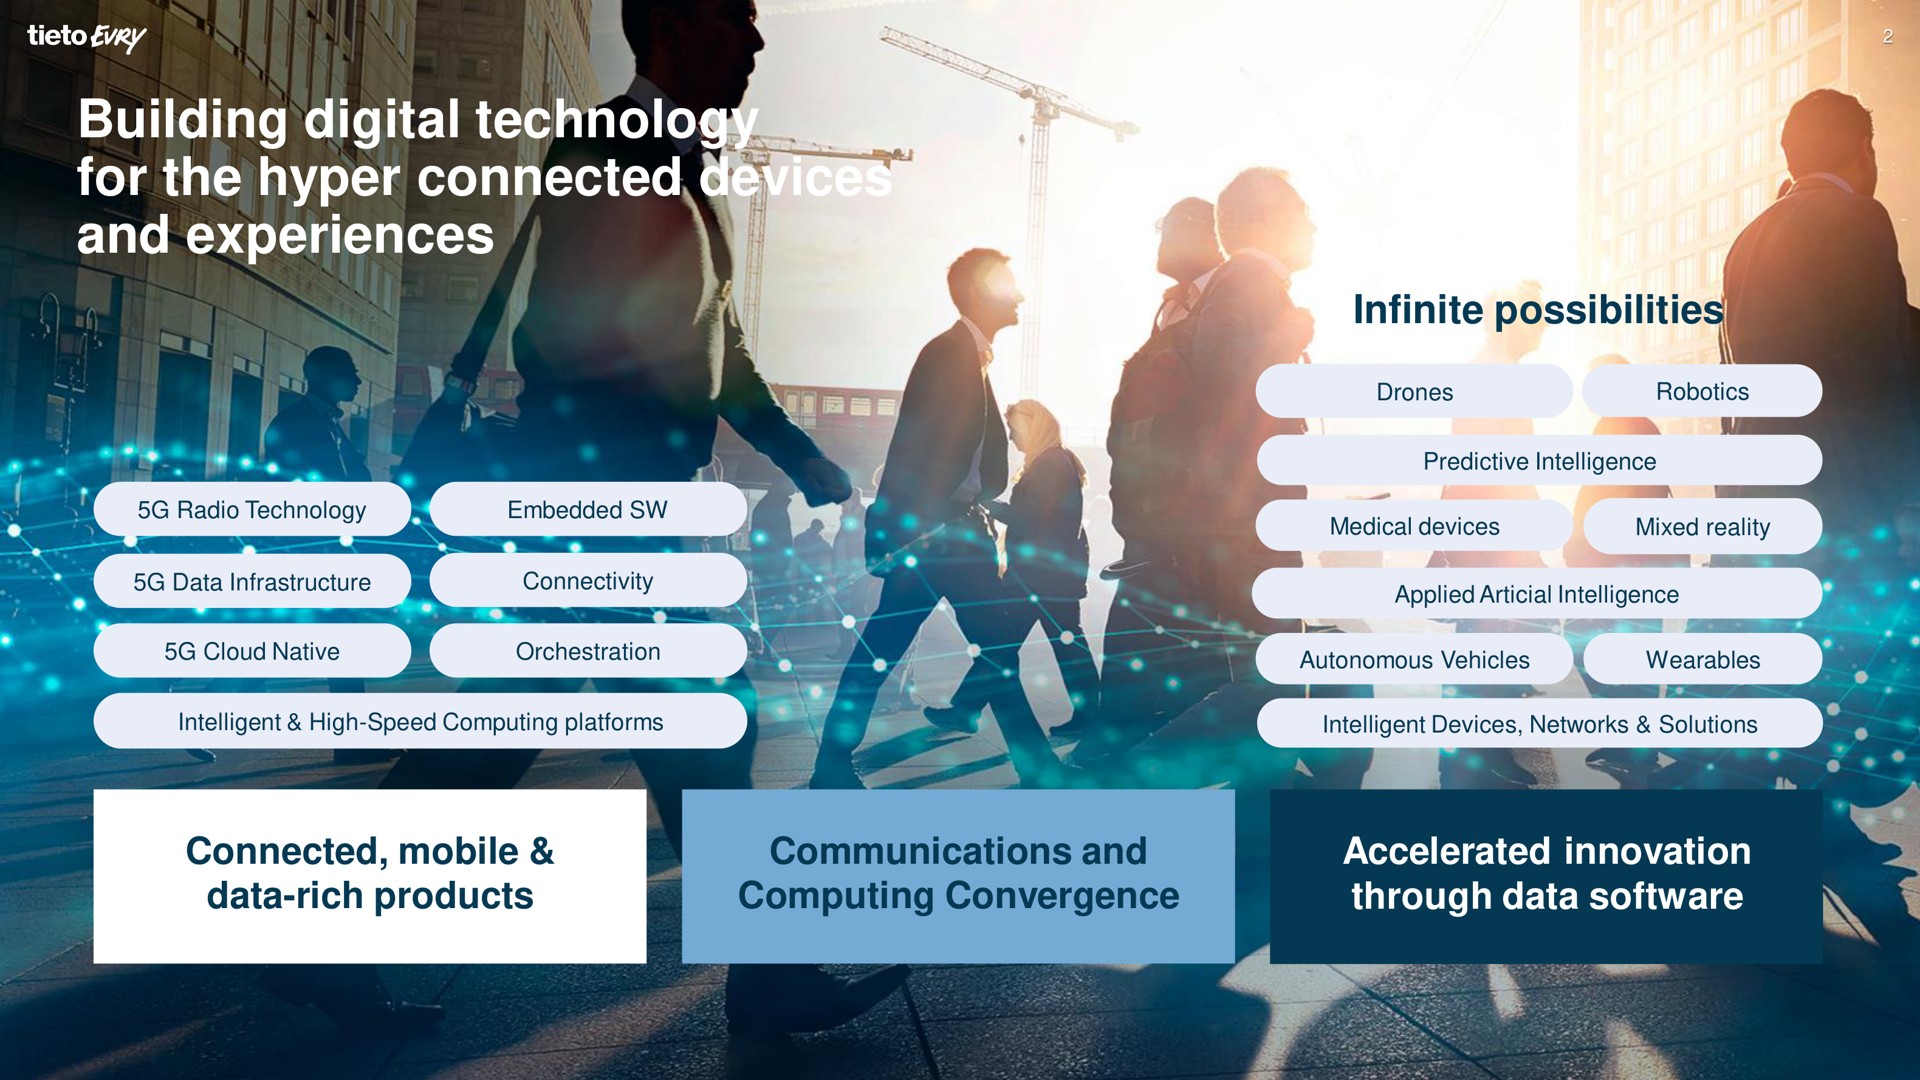 building digital technology for the hyper connected devices and experiences | Tietoevry